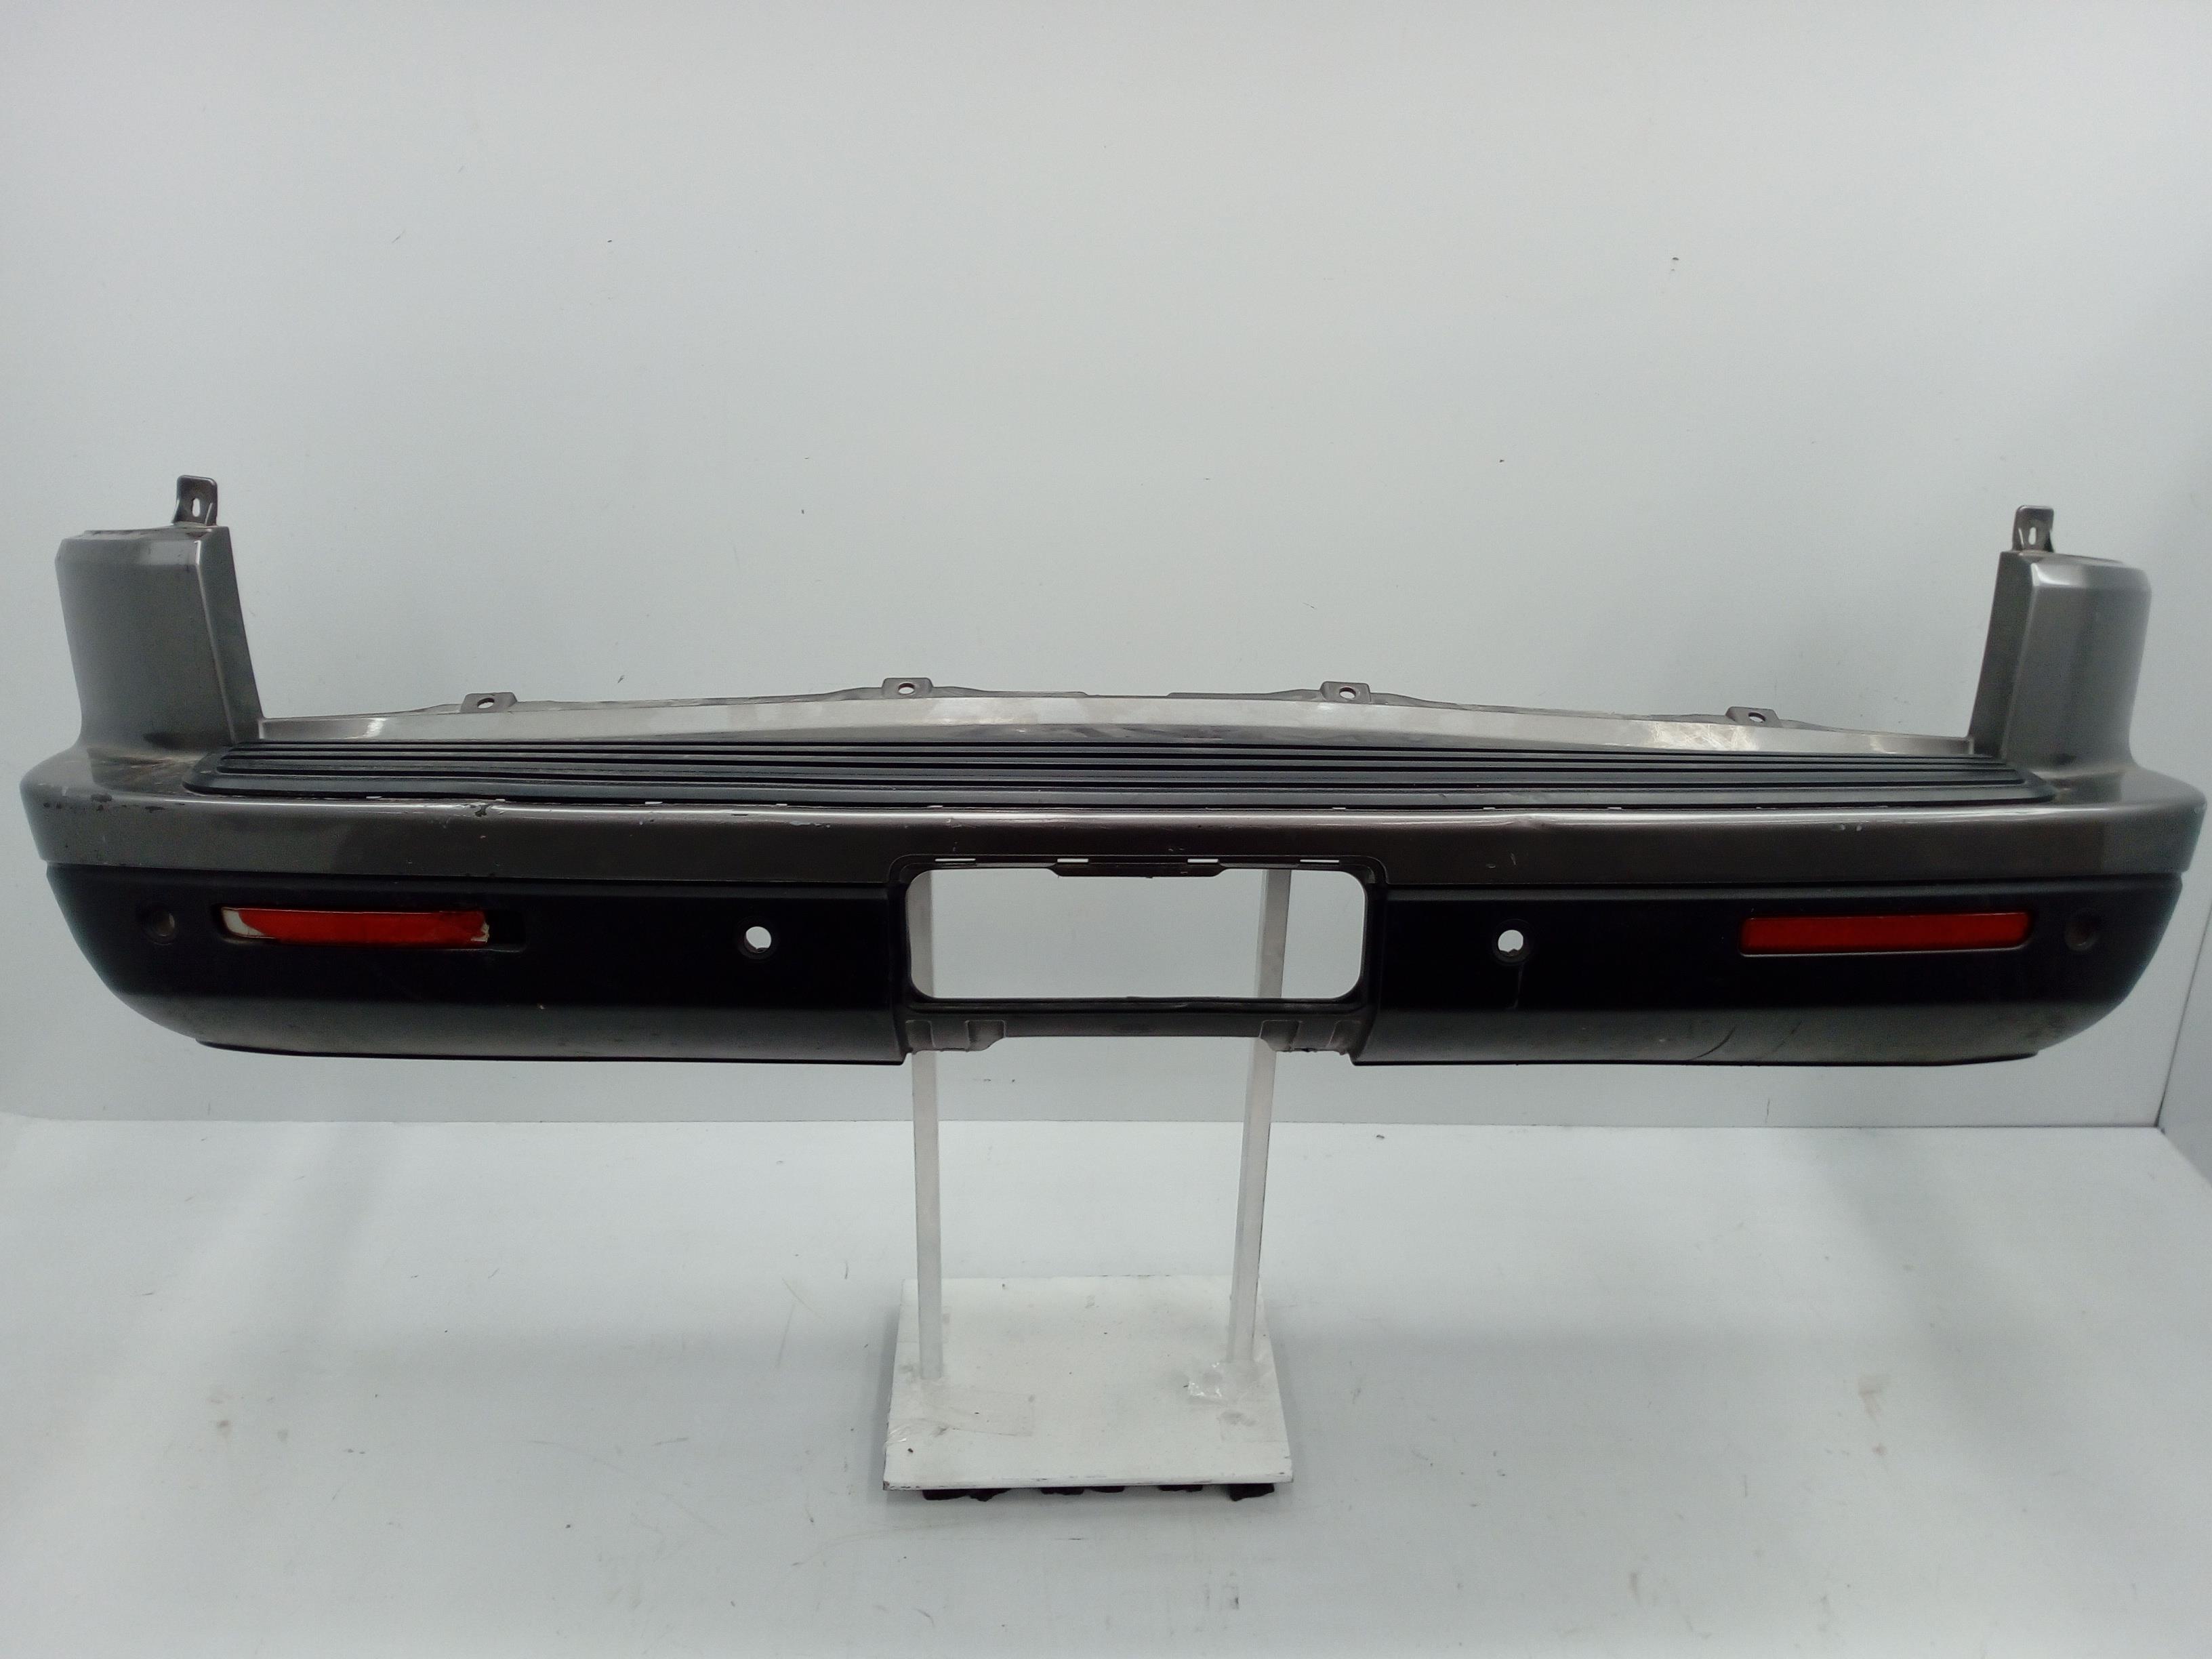 LAND ROVER Discovery 4 generation (2009-2016) Rear Bumper LR015463 24026906